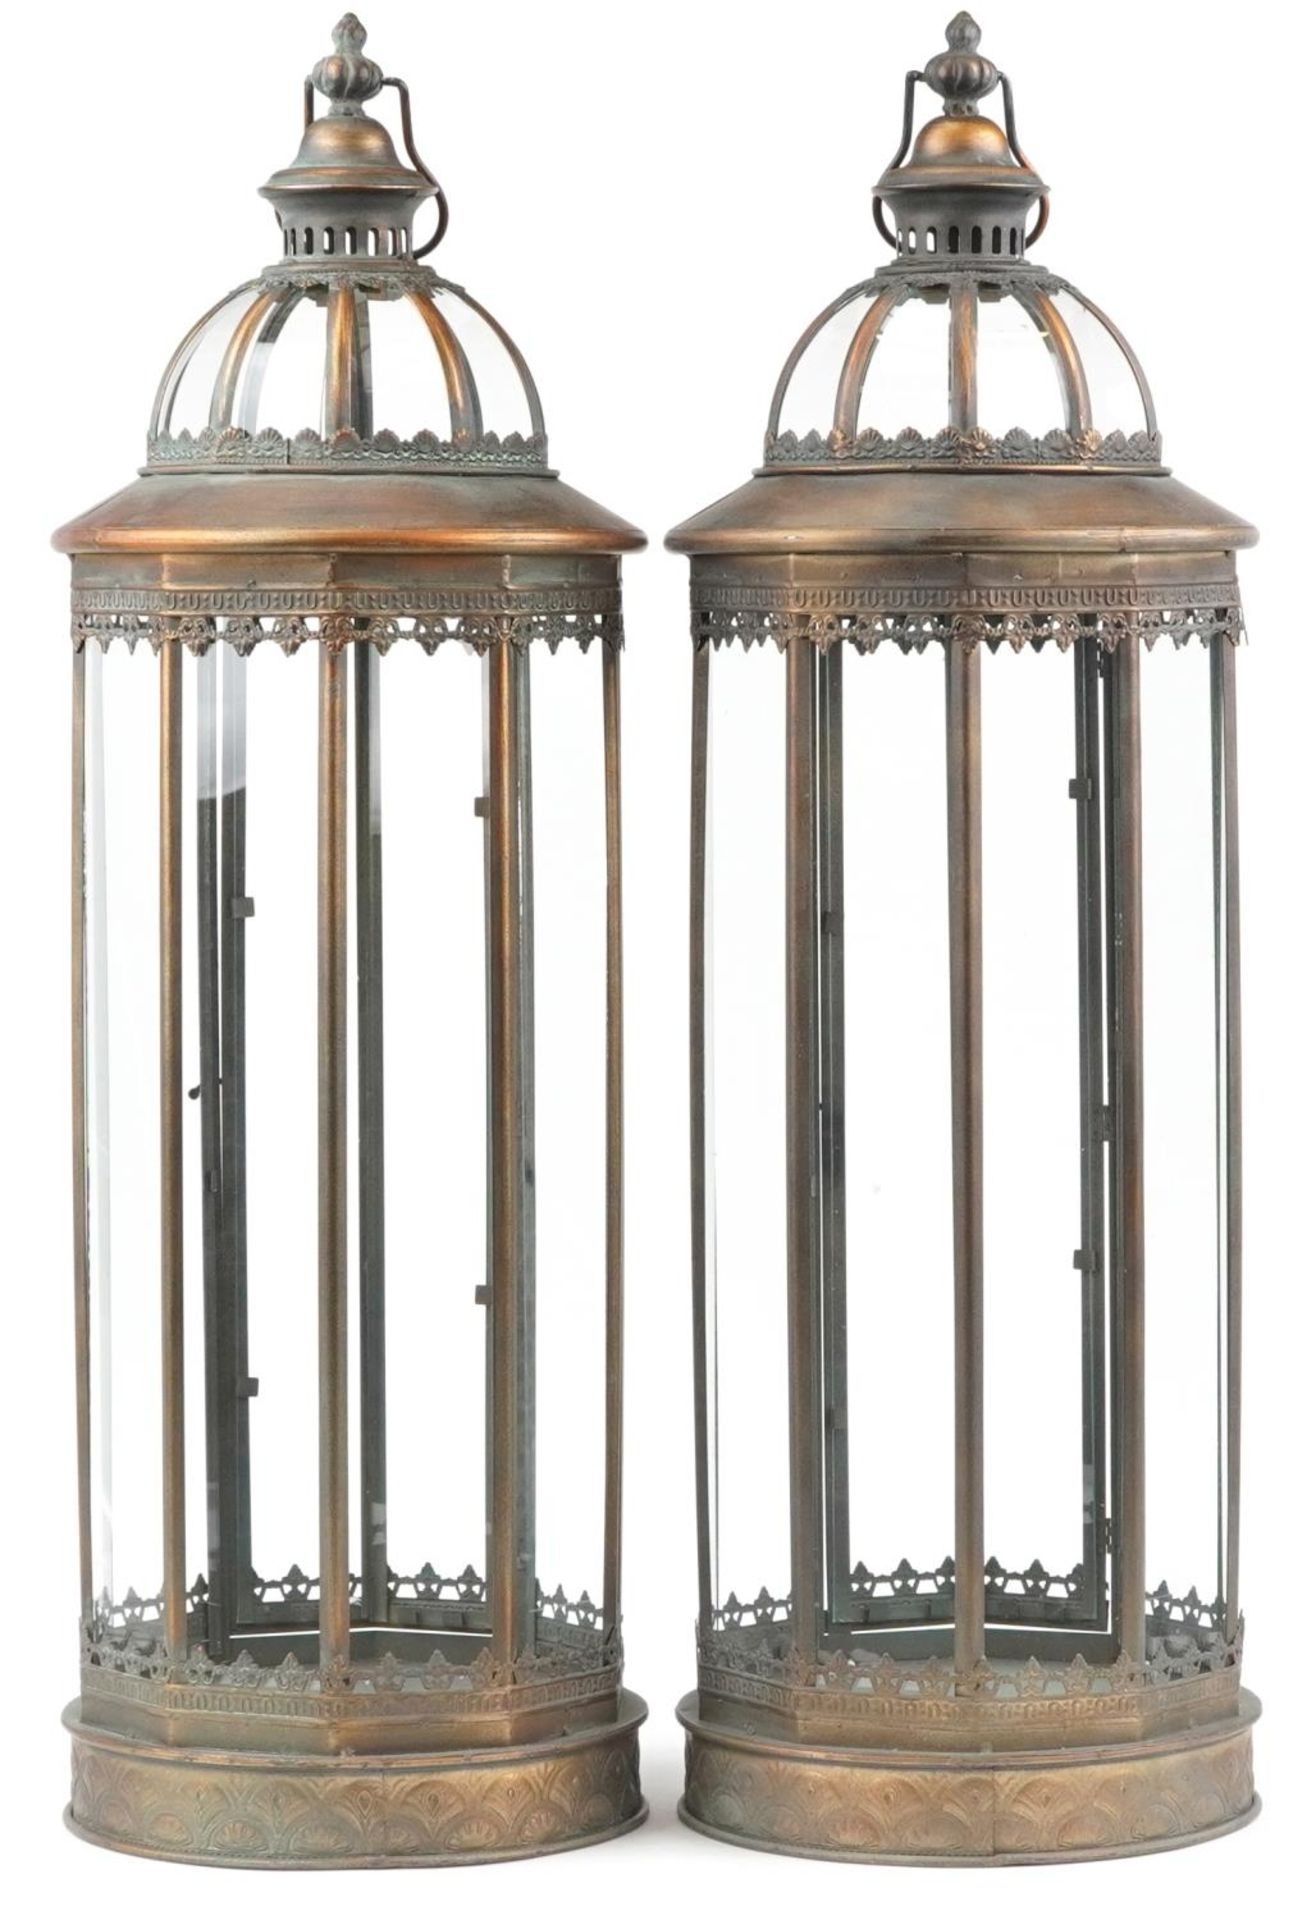 Large pair of bronzed hanging lanterns with glass panels, 85cm high